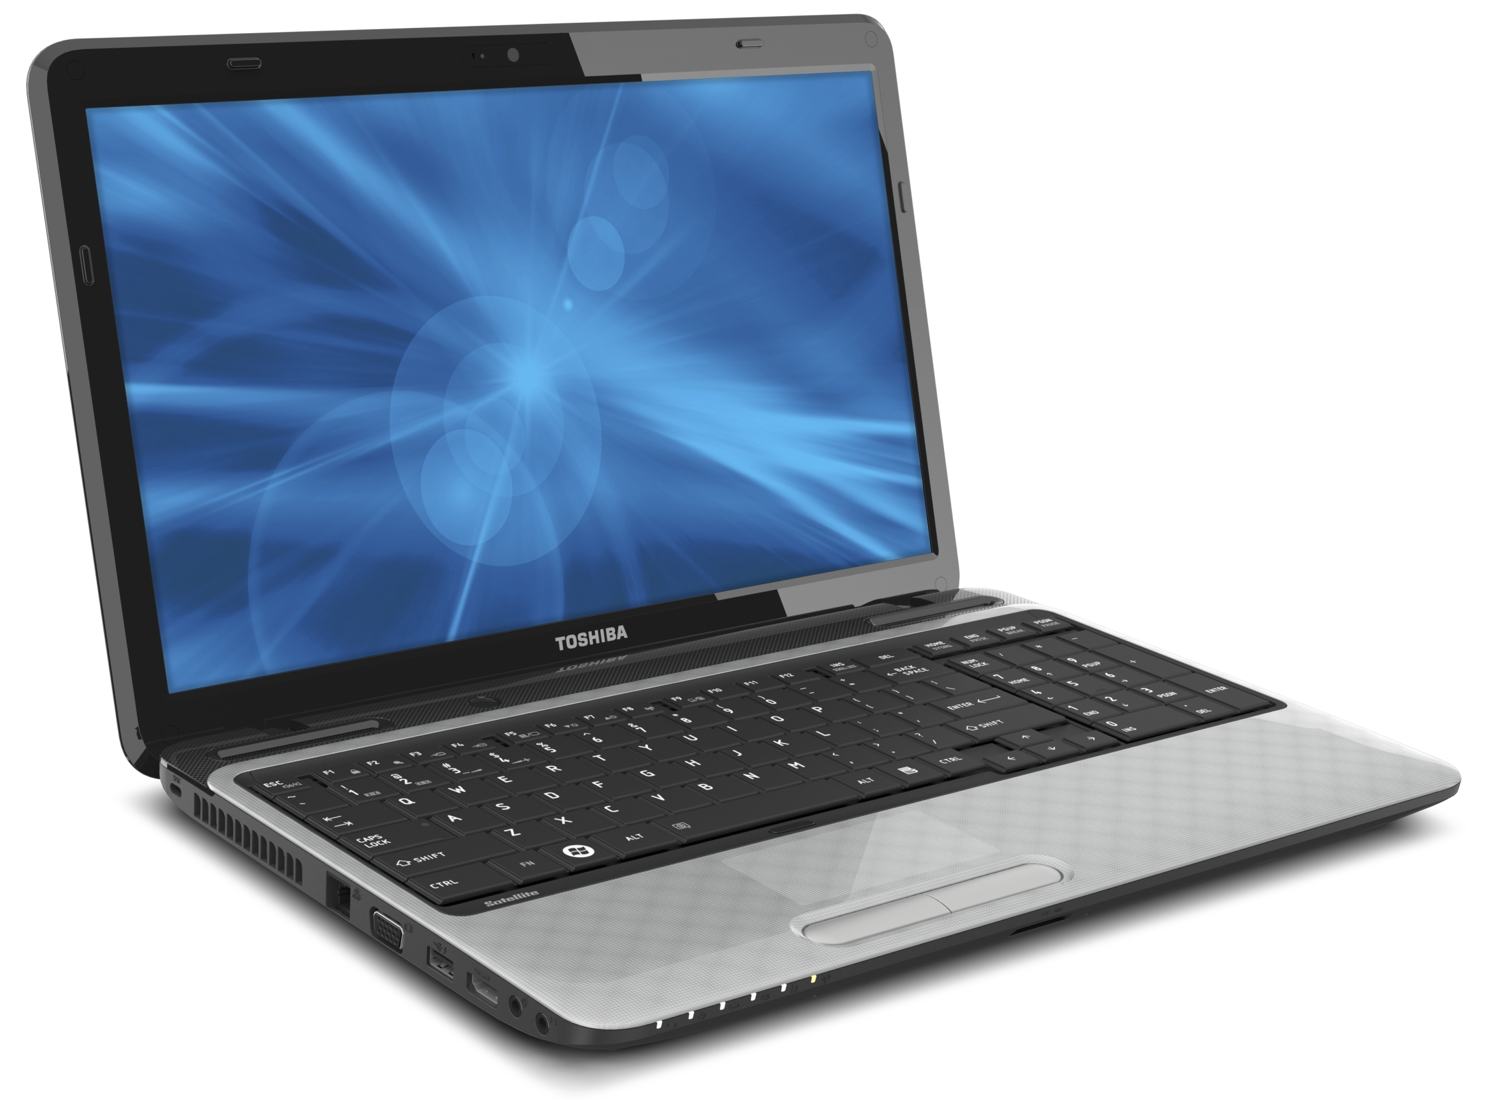 http://thetechjournal.com/wp-content/uploads/images/1111/1321885178-toshiba-satellite-l755s5349-156inch-led-laptop--2.jpg